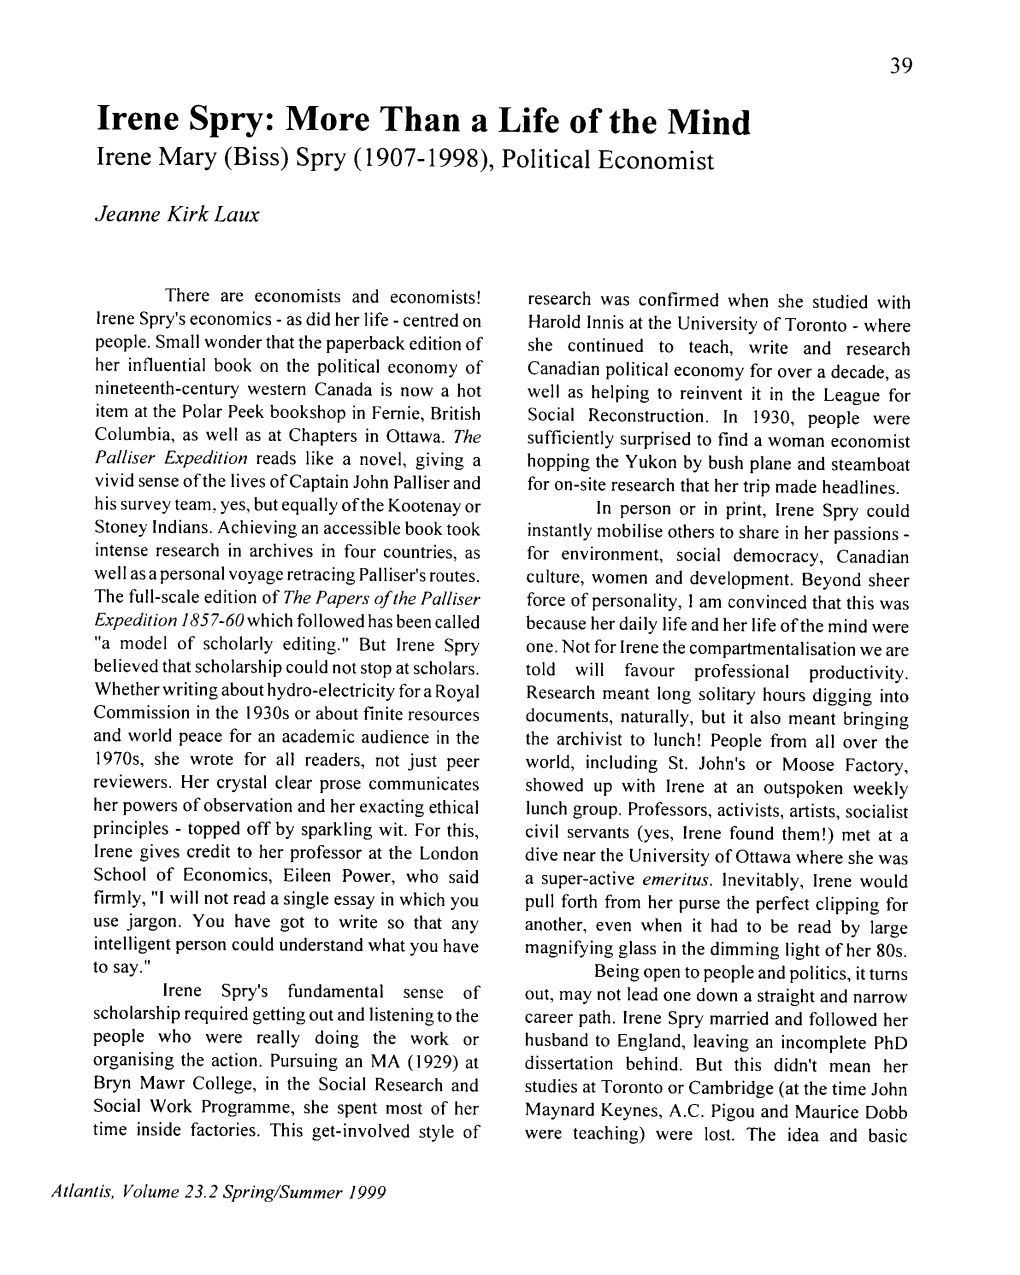 Irene Spry: More Than a Life of the Mind Irene Mary (Biss) Spry (1907-1998), Political Economist